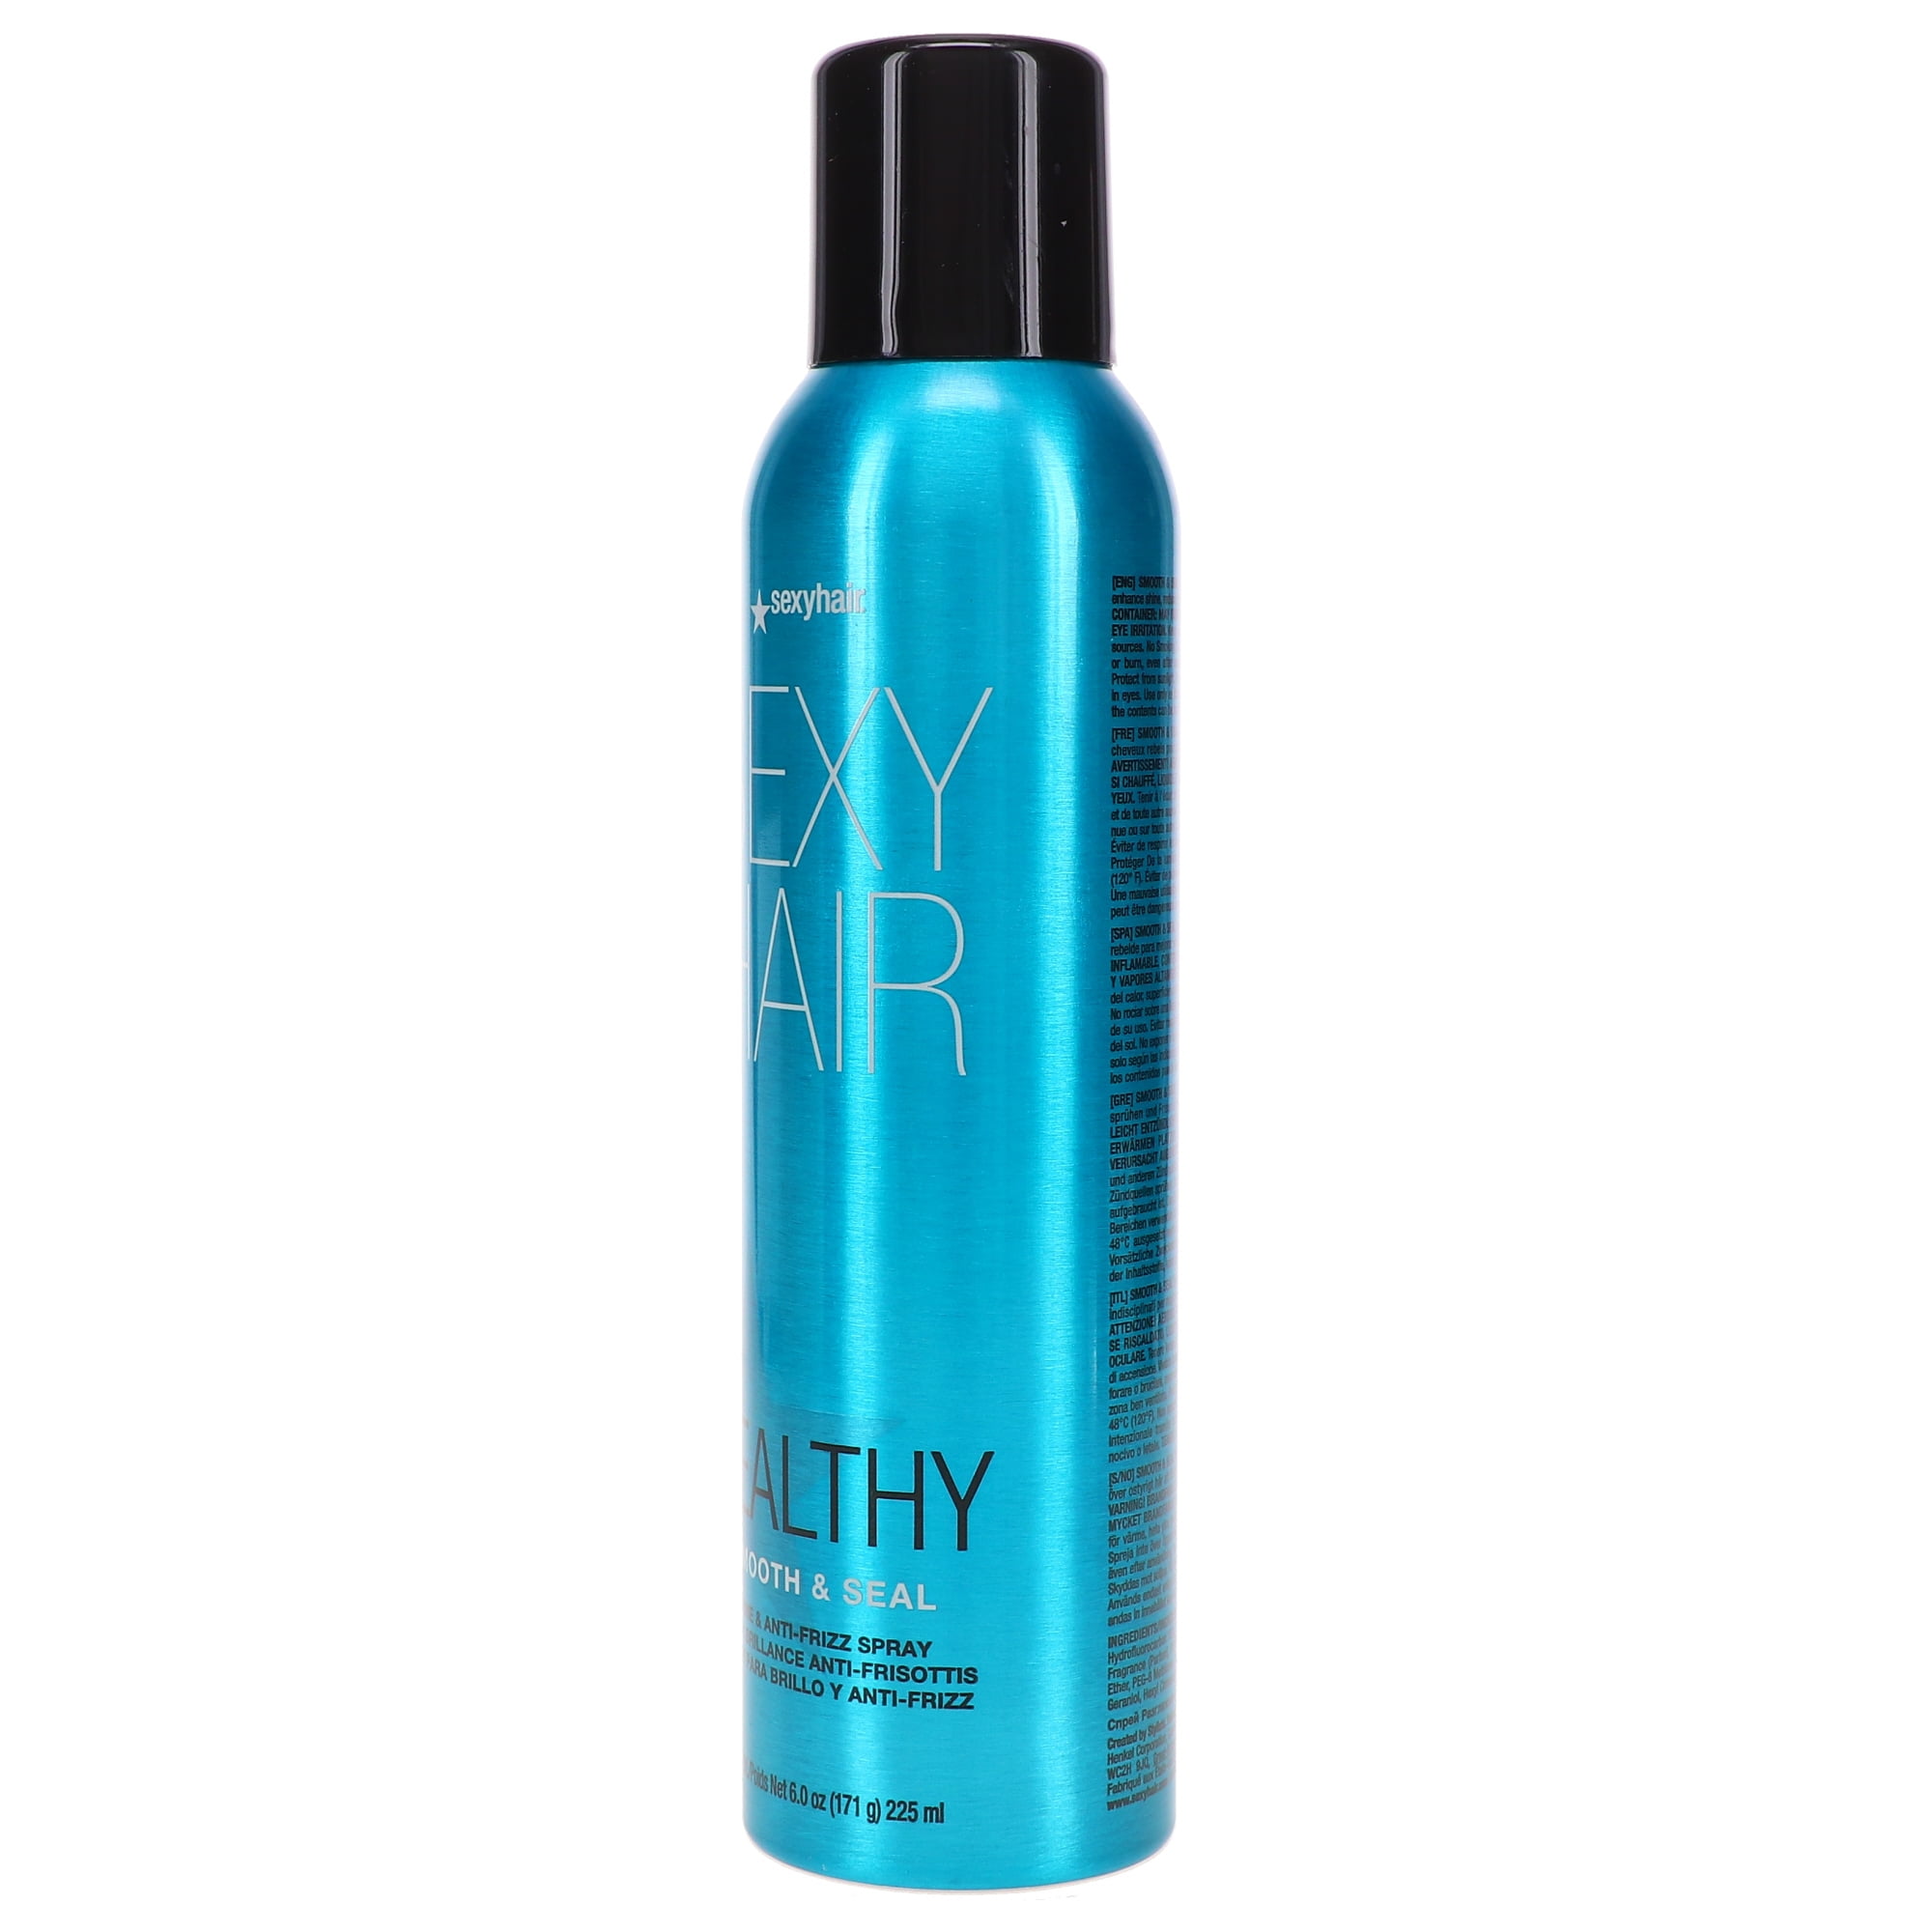 Short Sexy Hair Shatter Separate & Hold Spray (Size : 4.2 oz) 